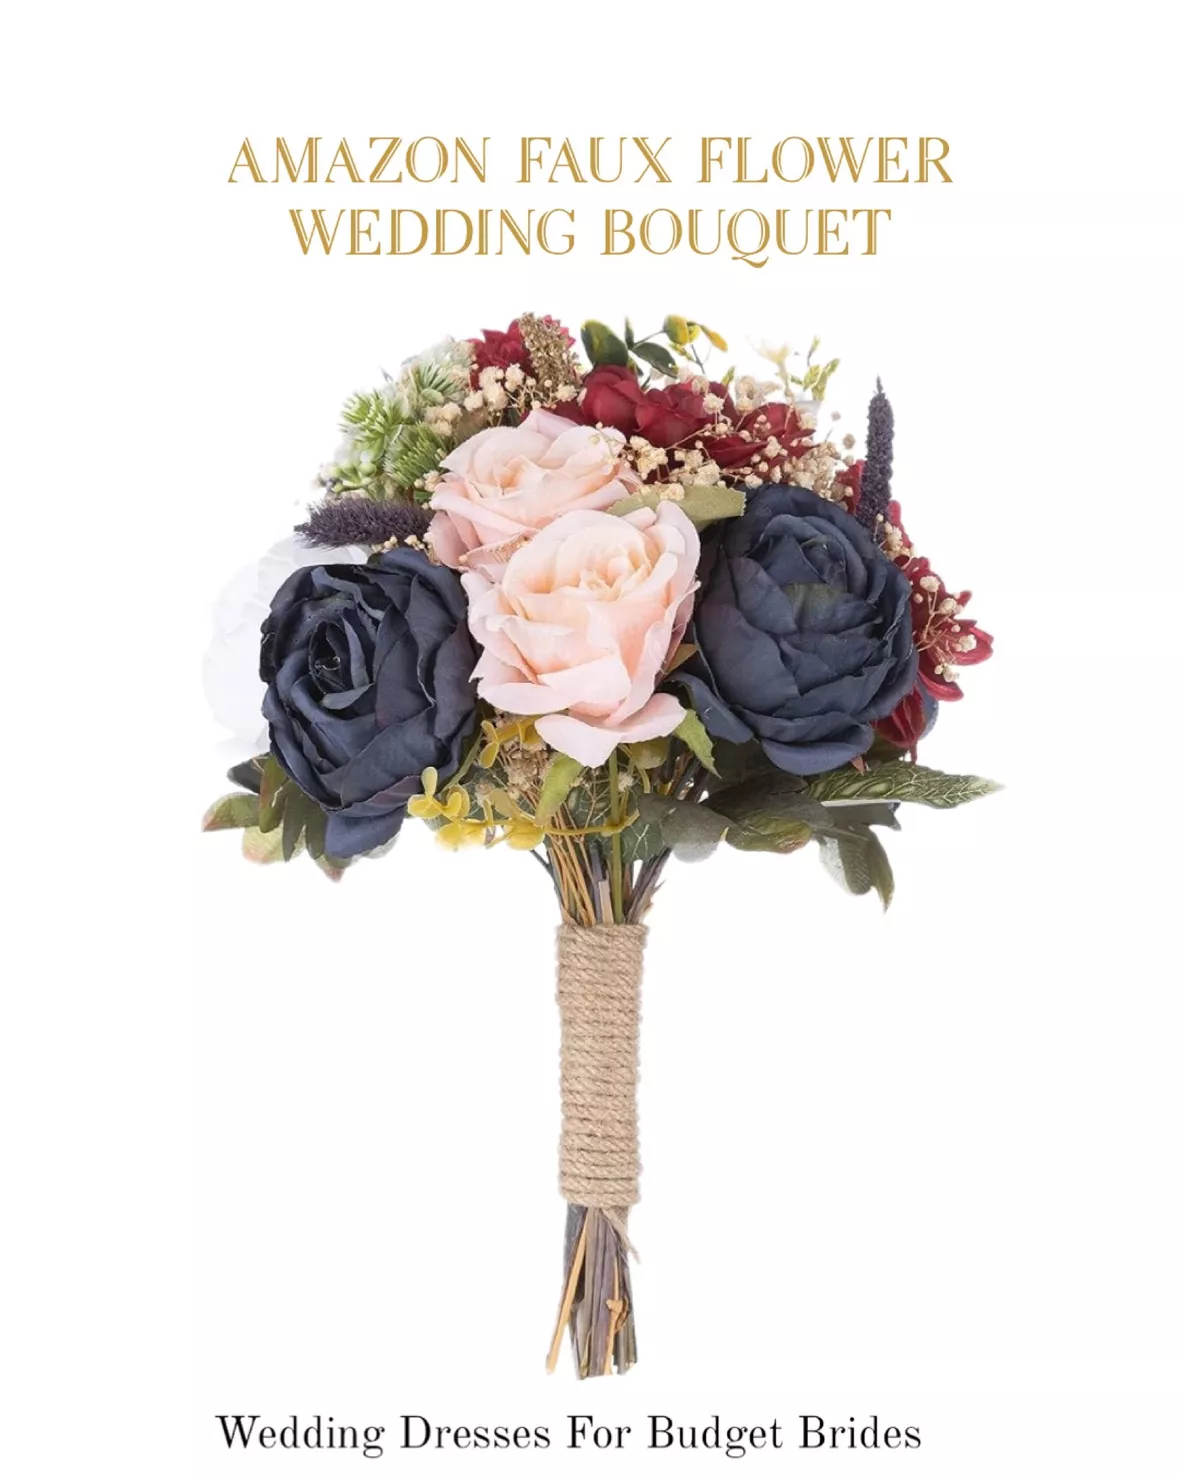 How Many Flowers Do You Need for a Bridal Bouquet? – Ling's Moment